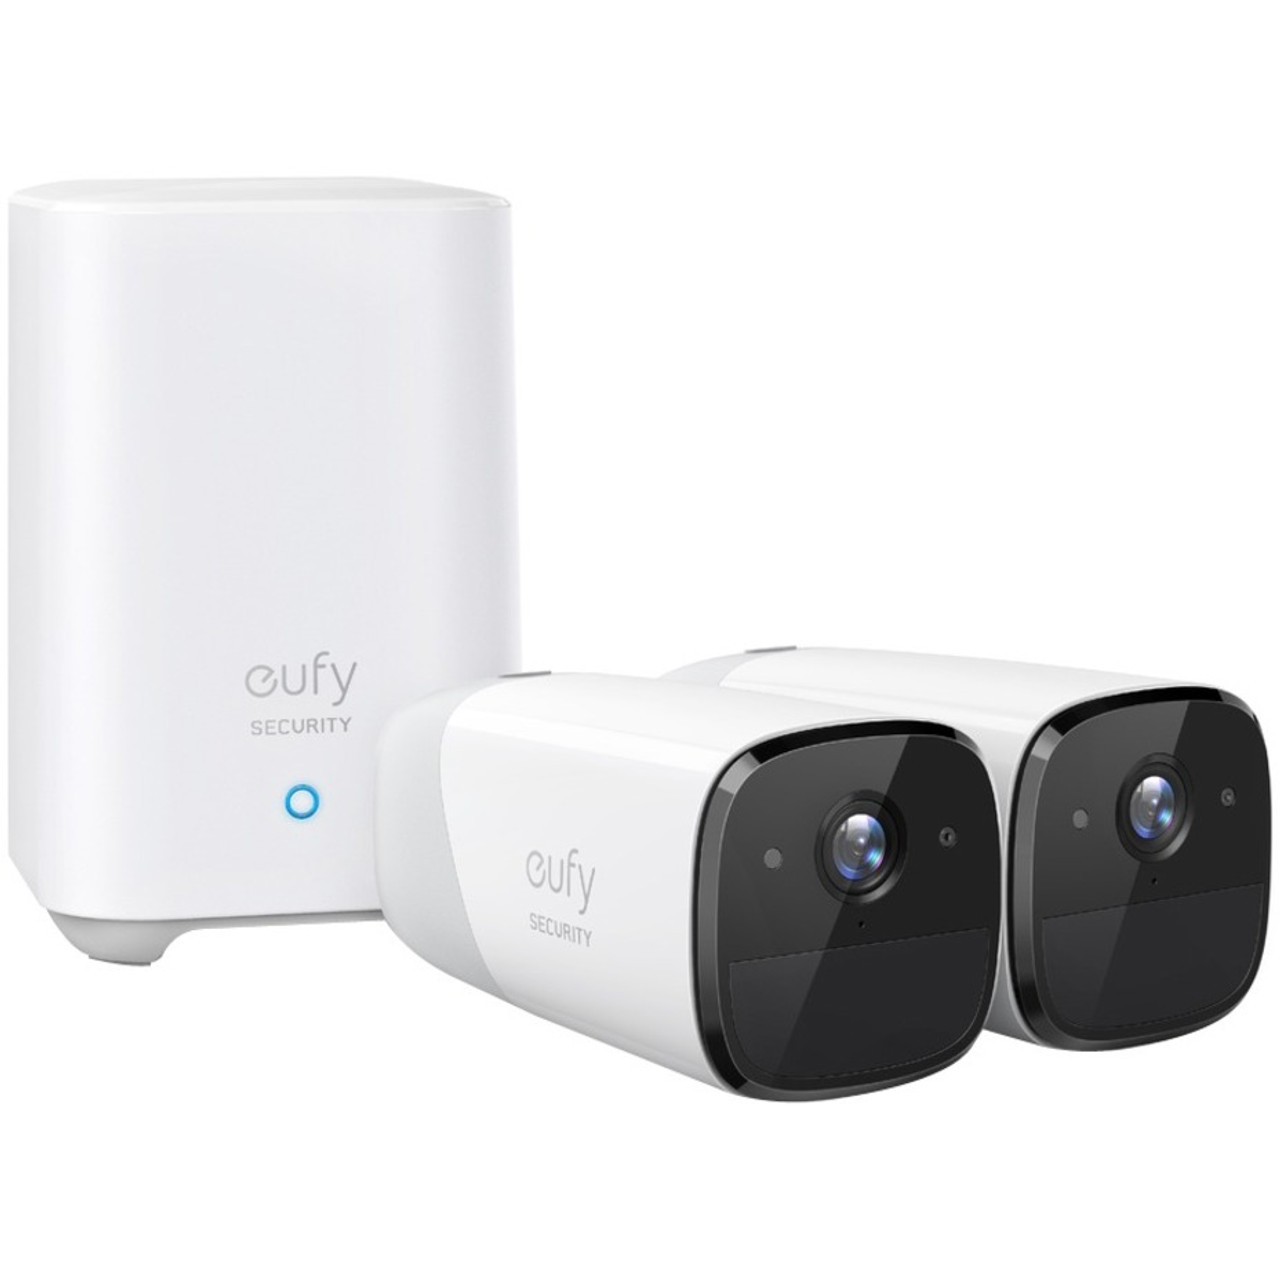 eufy Security eufyCam 2 Wireless Home Security Camera System, 365-Day Battery Life, HD 1080p, IP67 Weatherproof, Night Vision, Compatible with Apple HomeKit, Amazon Alexa, 1-Cam Kit, No Monthly Fee - T88411D1